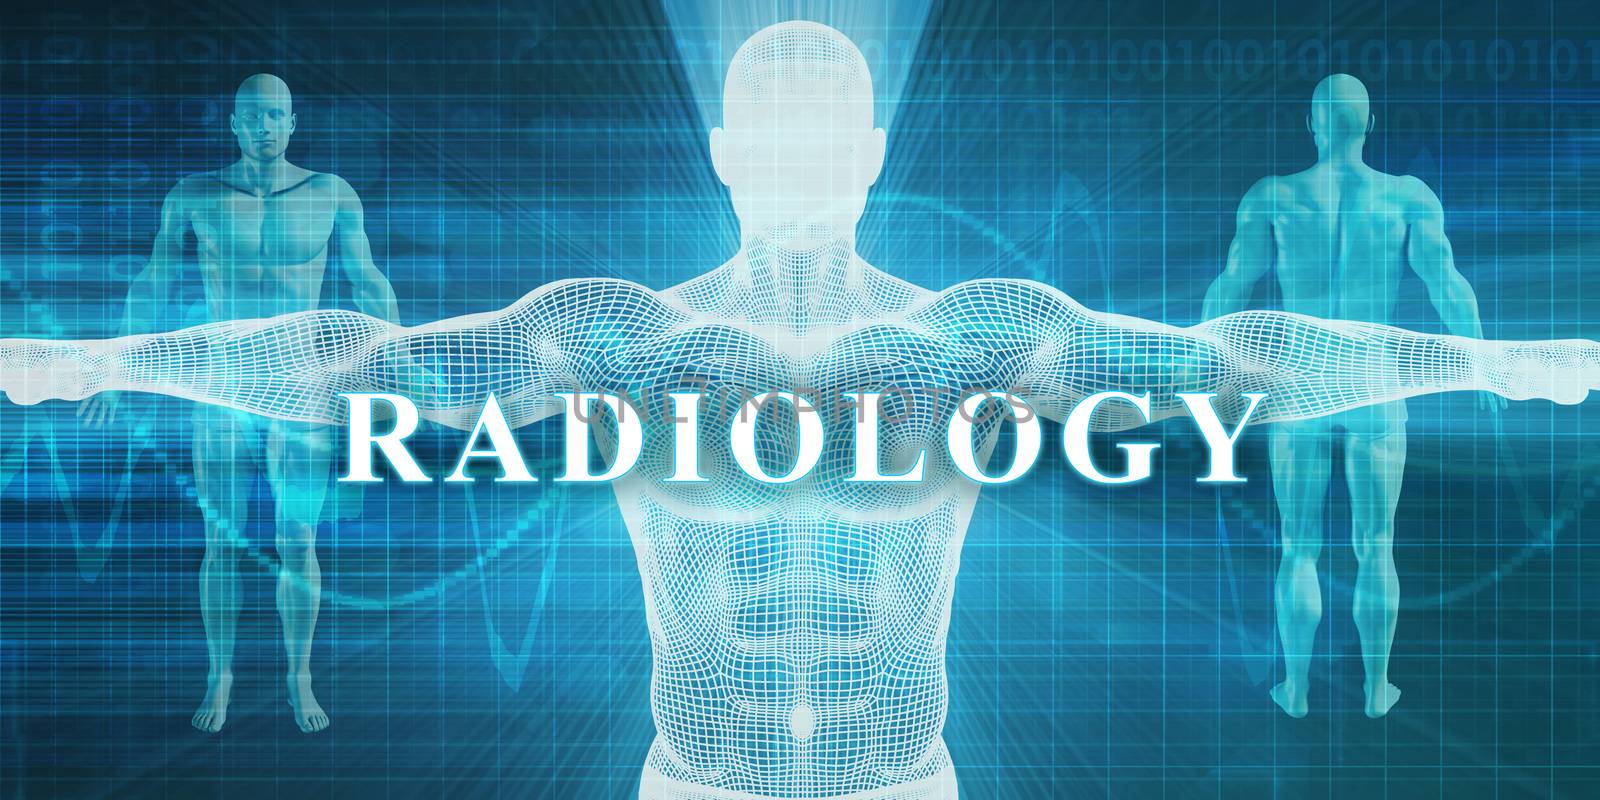 Radiology as a Medical Specialty Field or Department